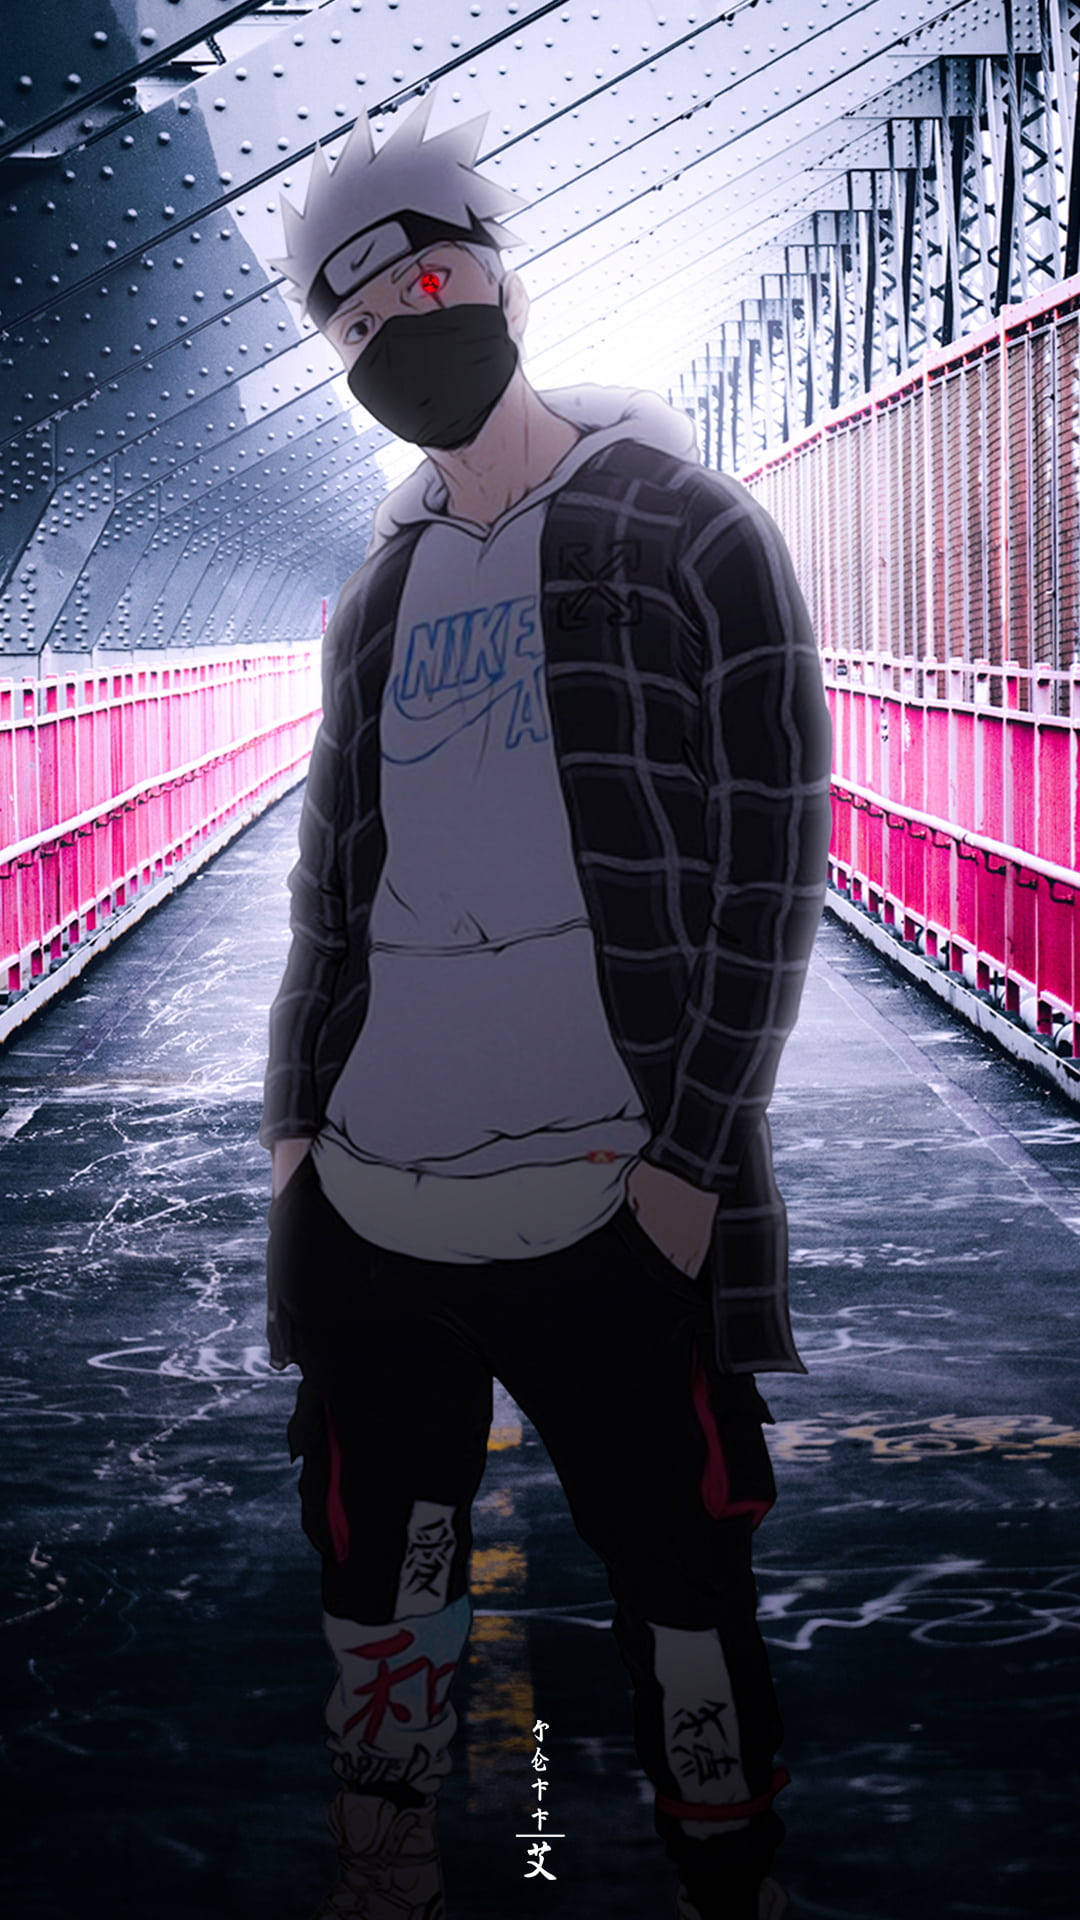 Naruto Drip - Blending Anime And Street Style Background